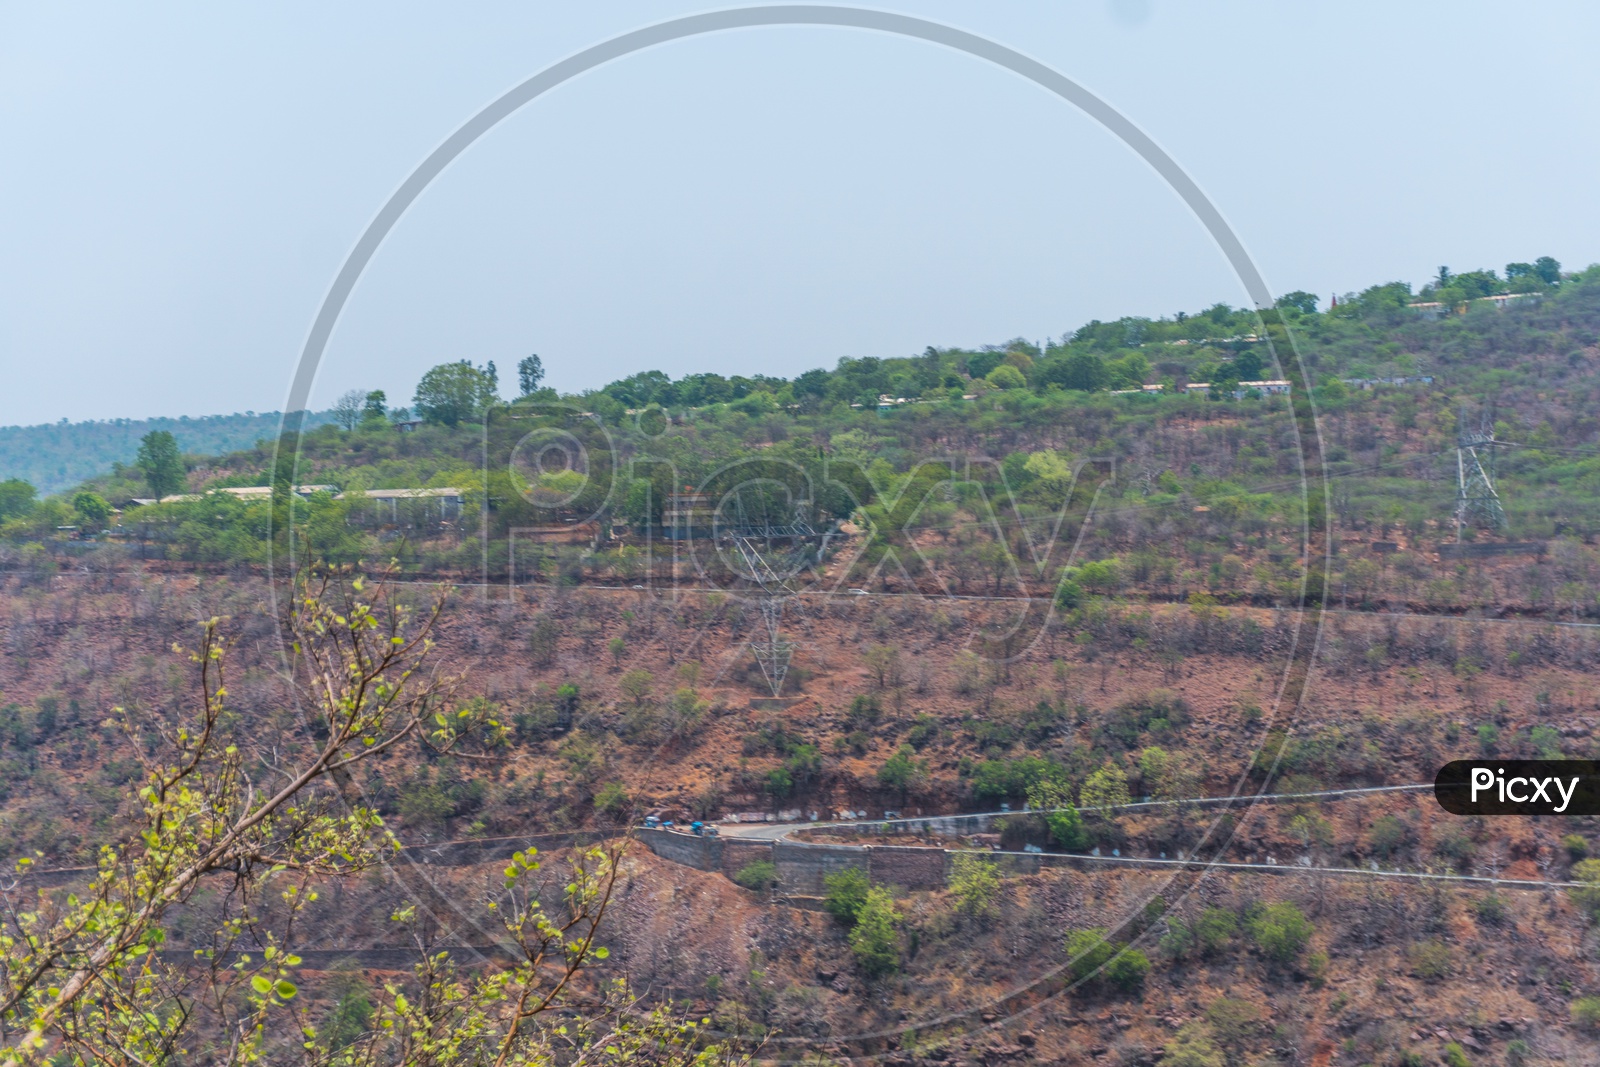 Srisailam hills and Ghat roads